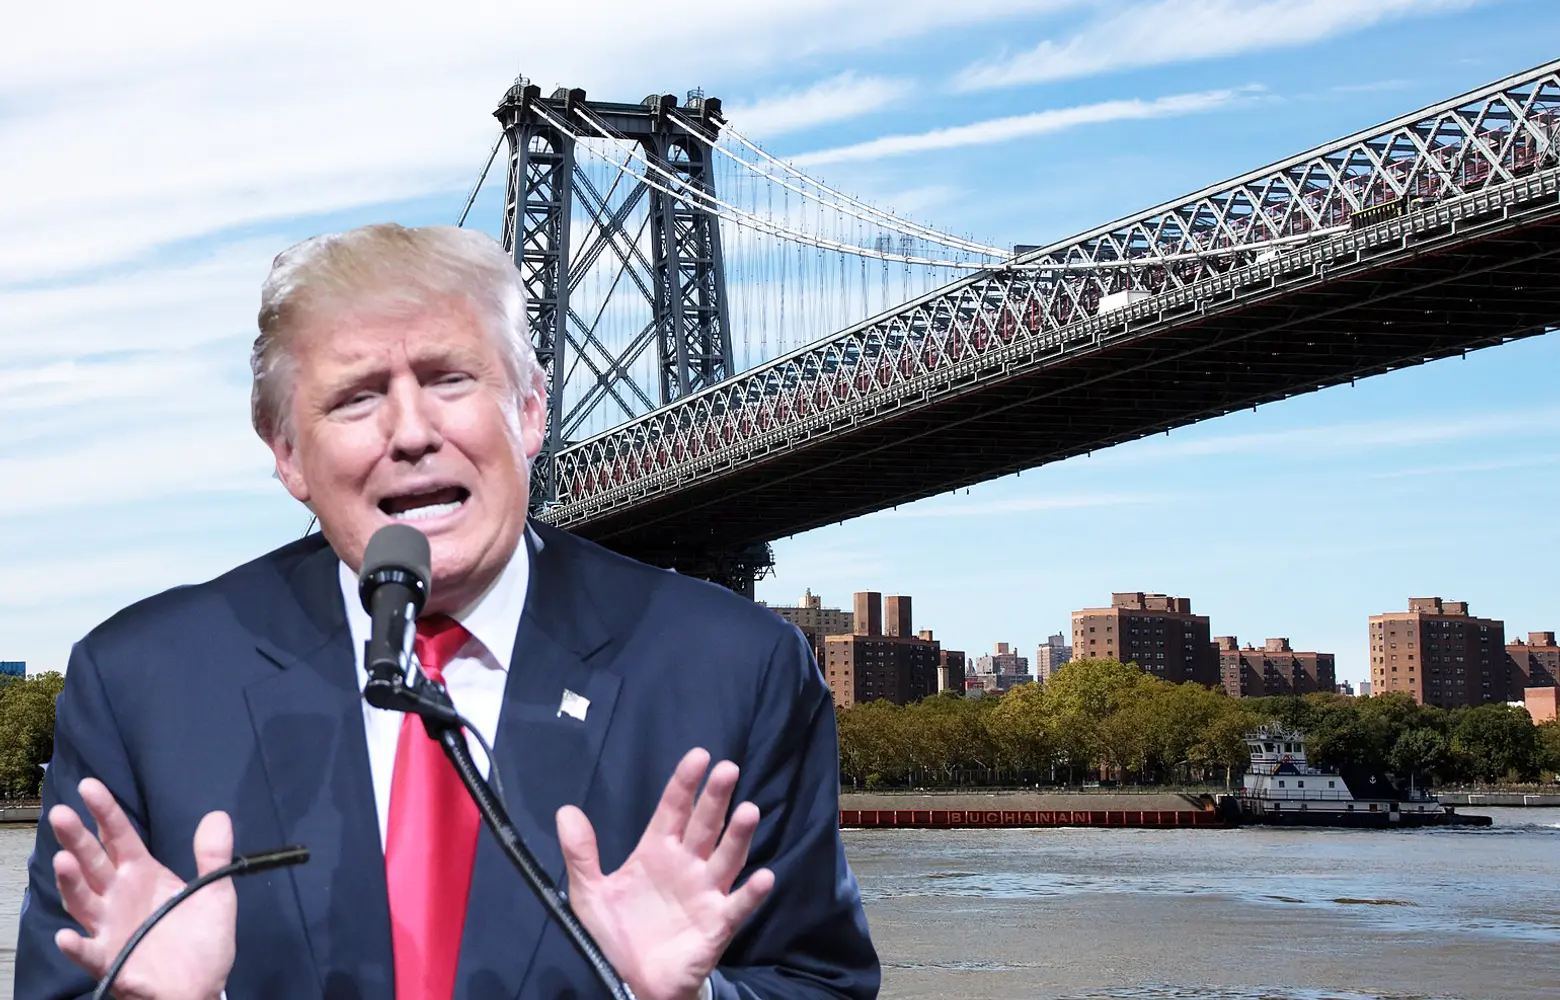 In 1988, Donald Trump wanted to repair the Williamsburg Bridge, but the Mayor said no thanks